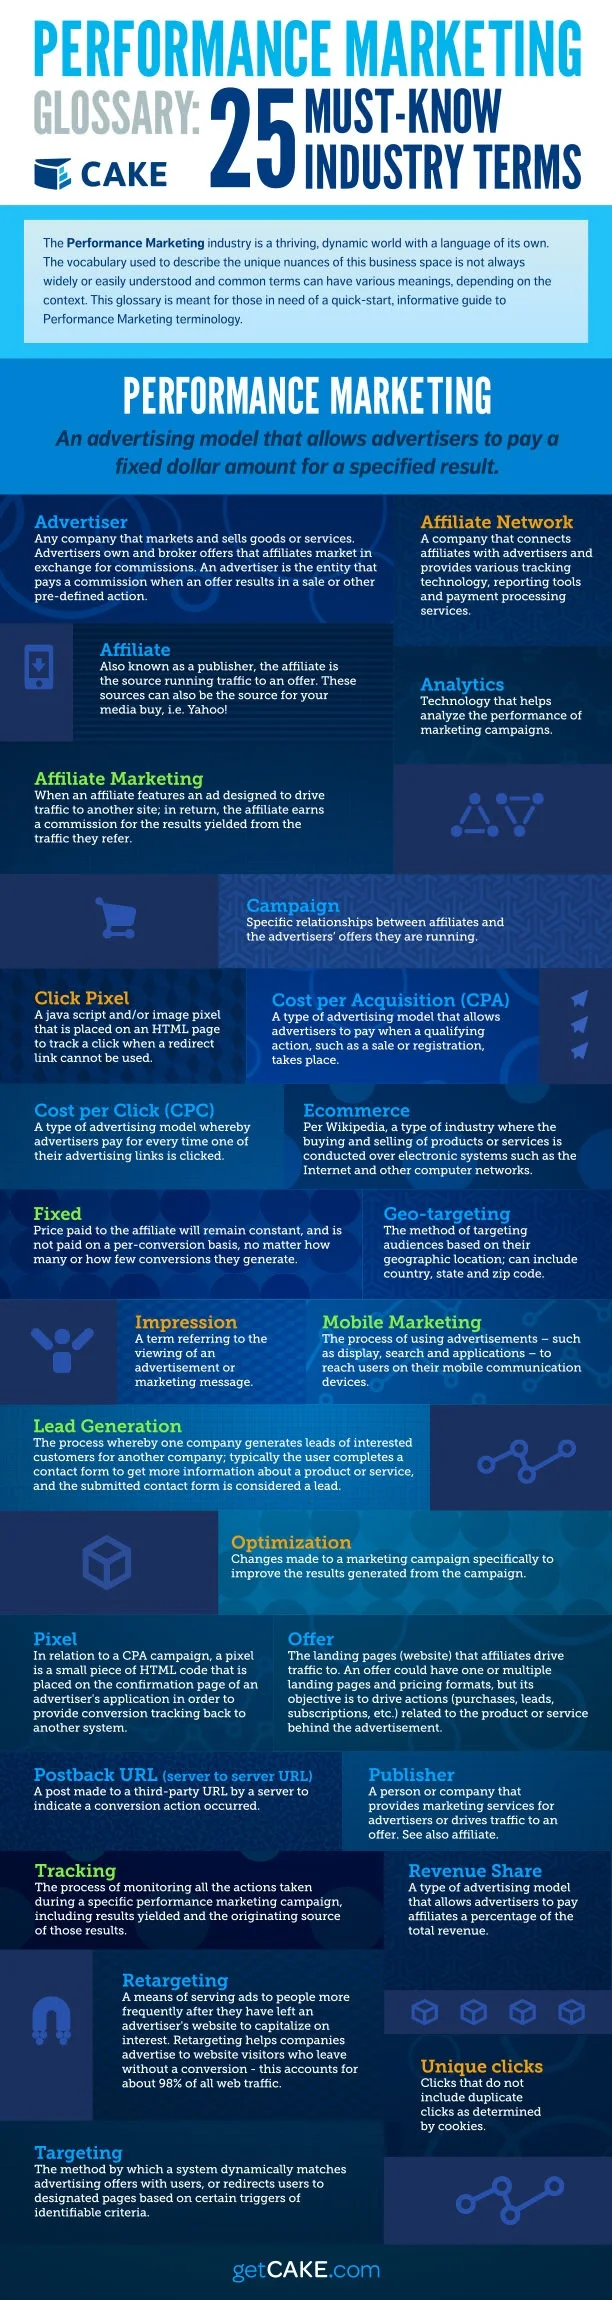 Performance Marketing Glossary: 25 Must Know Industry Terms - #Infographic